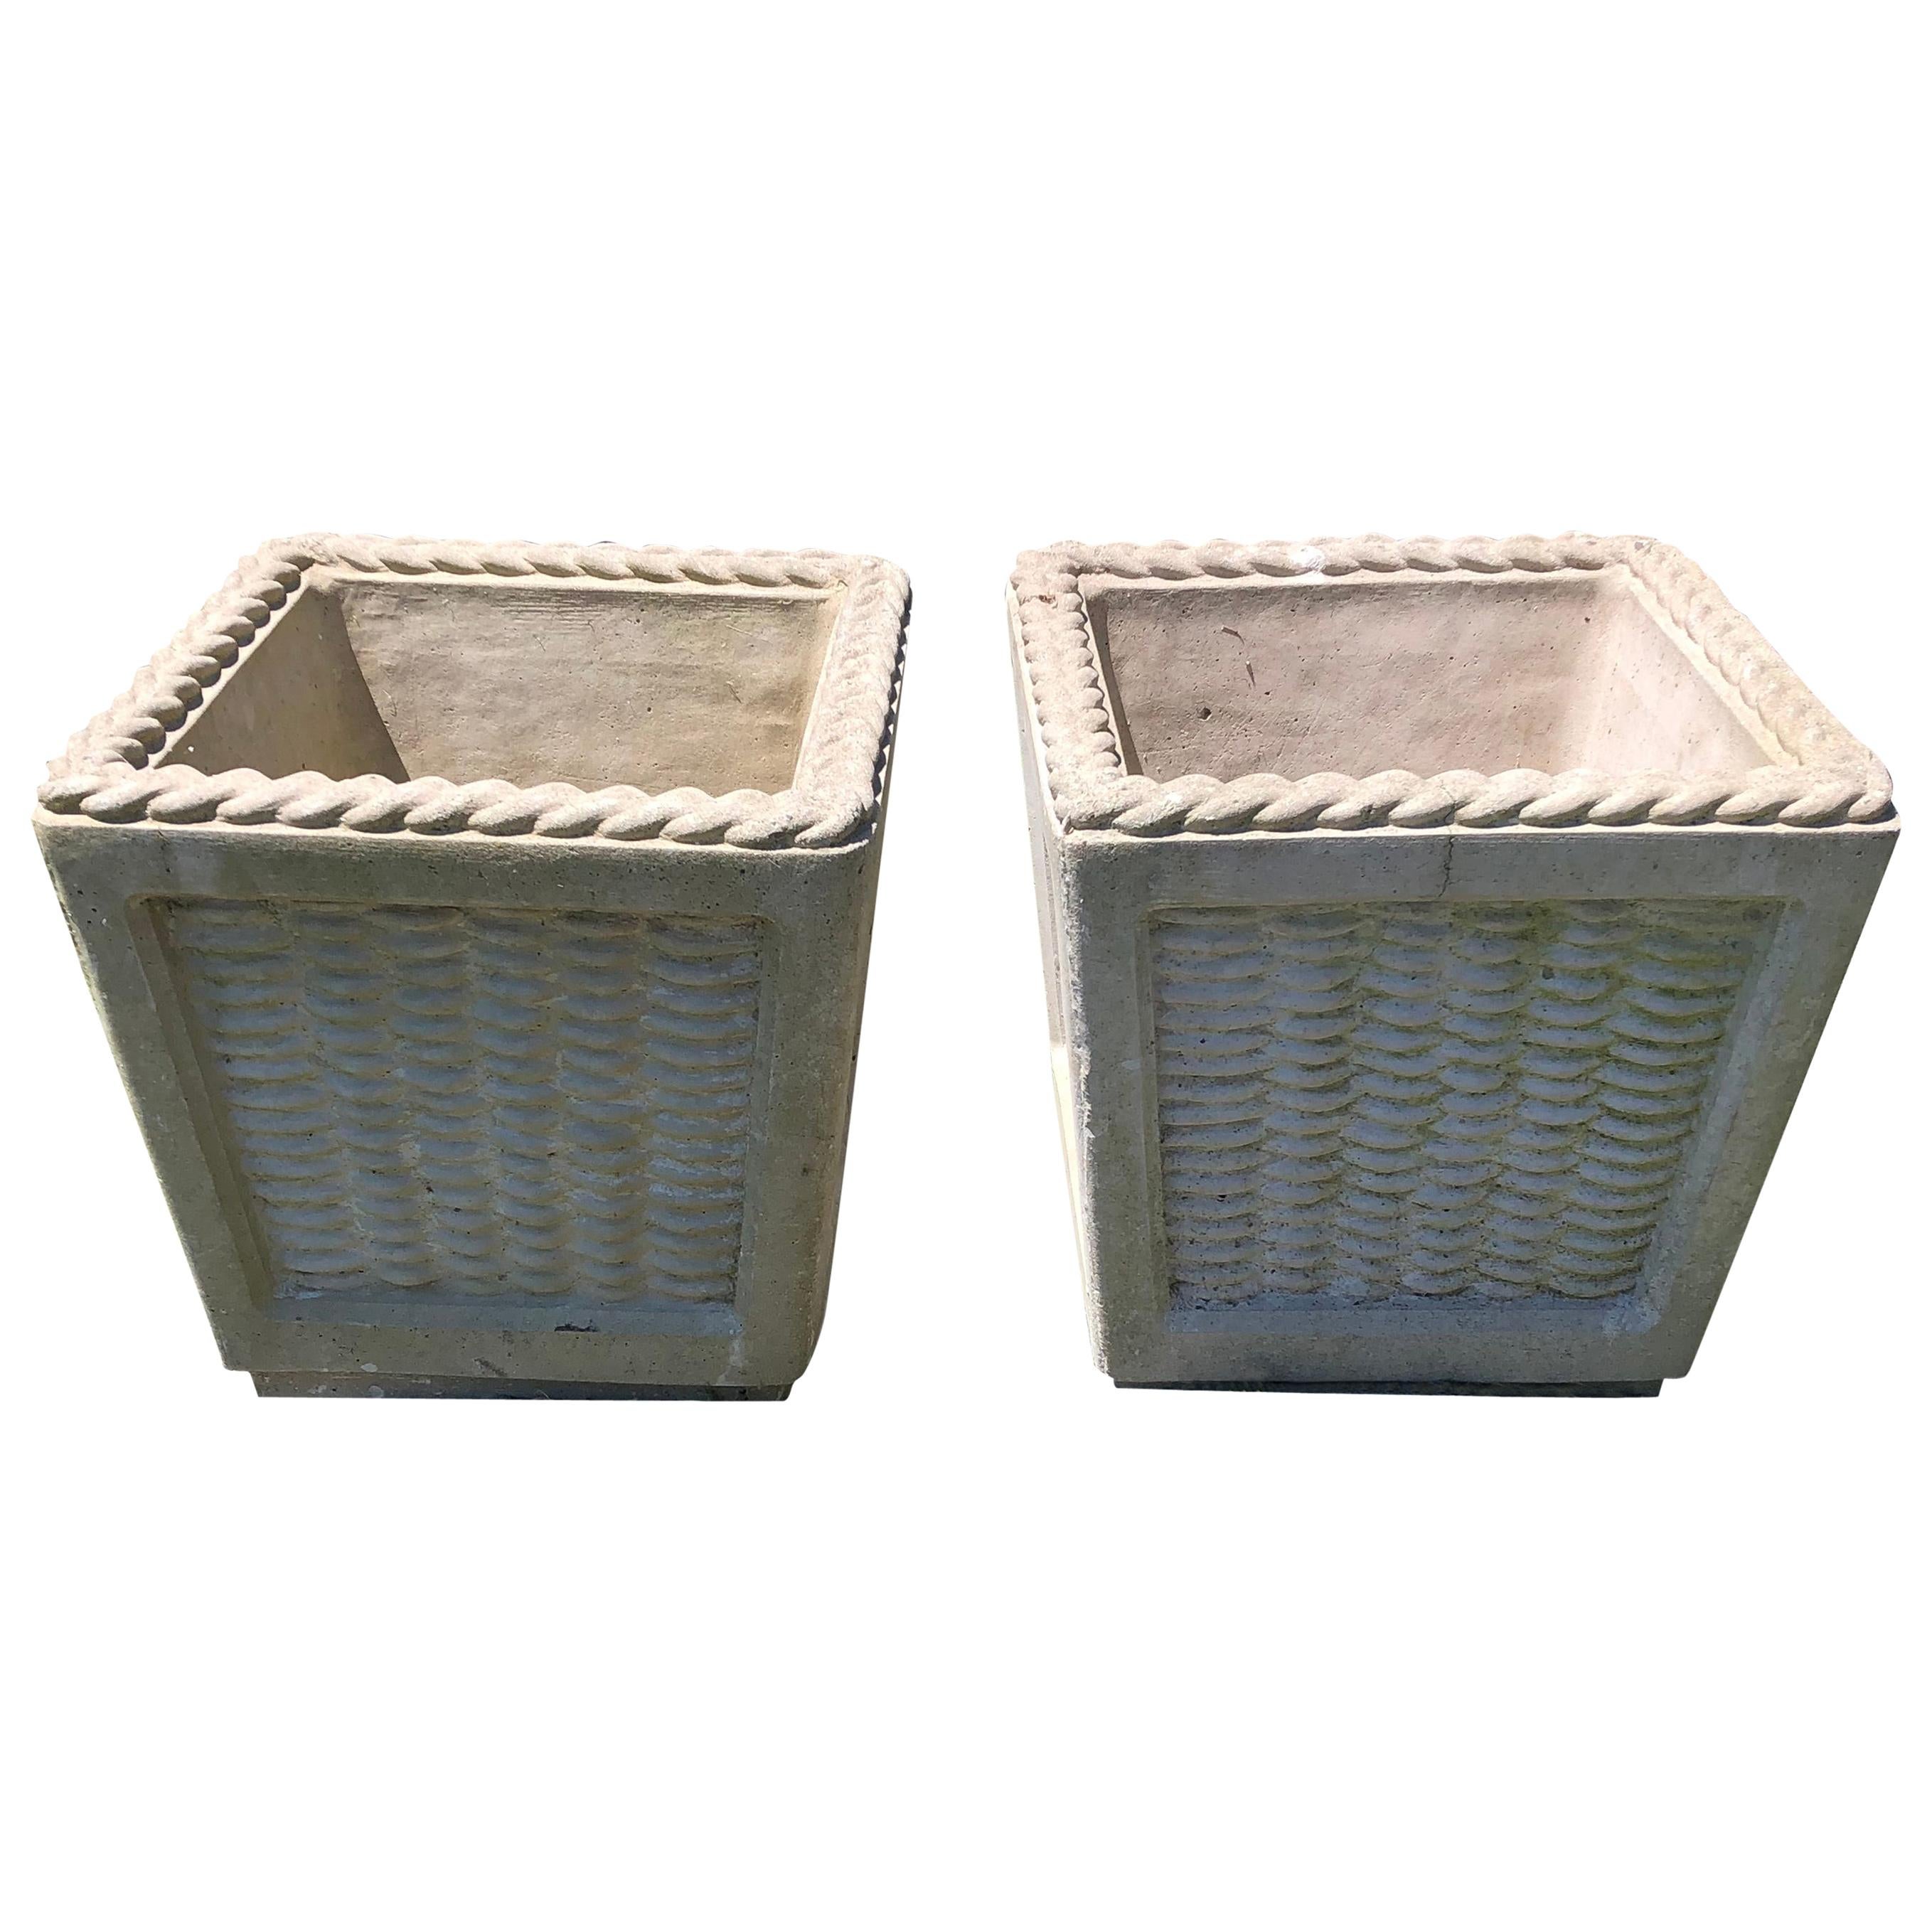 Pair of Charming Cast Cement Basket Motife Planters